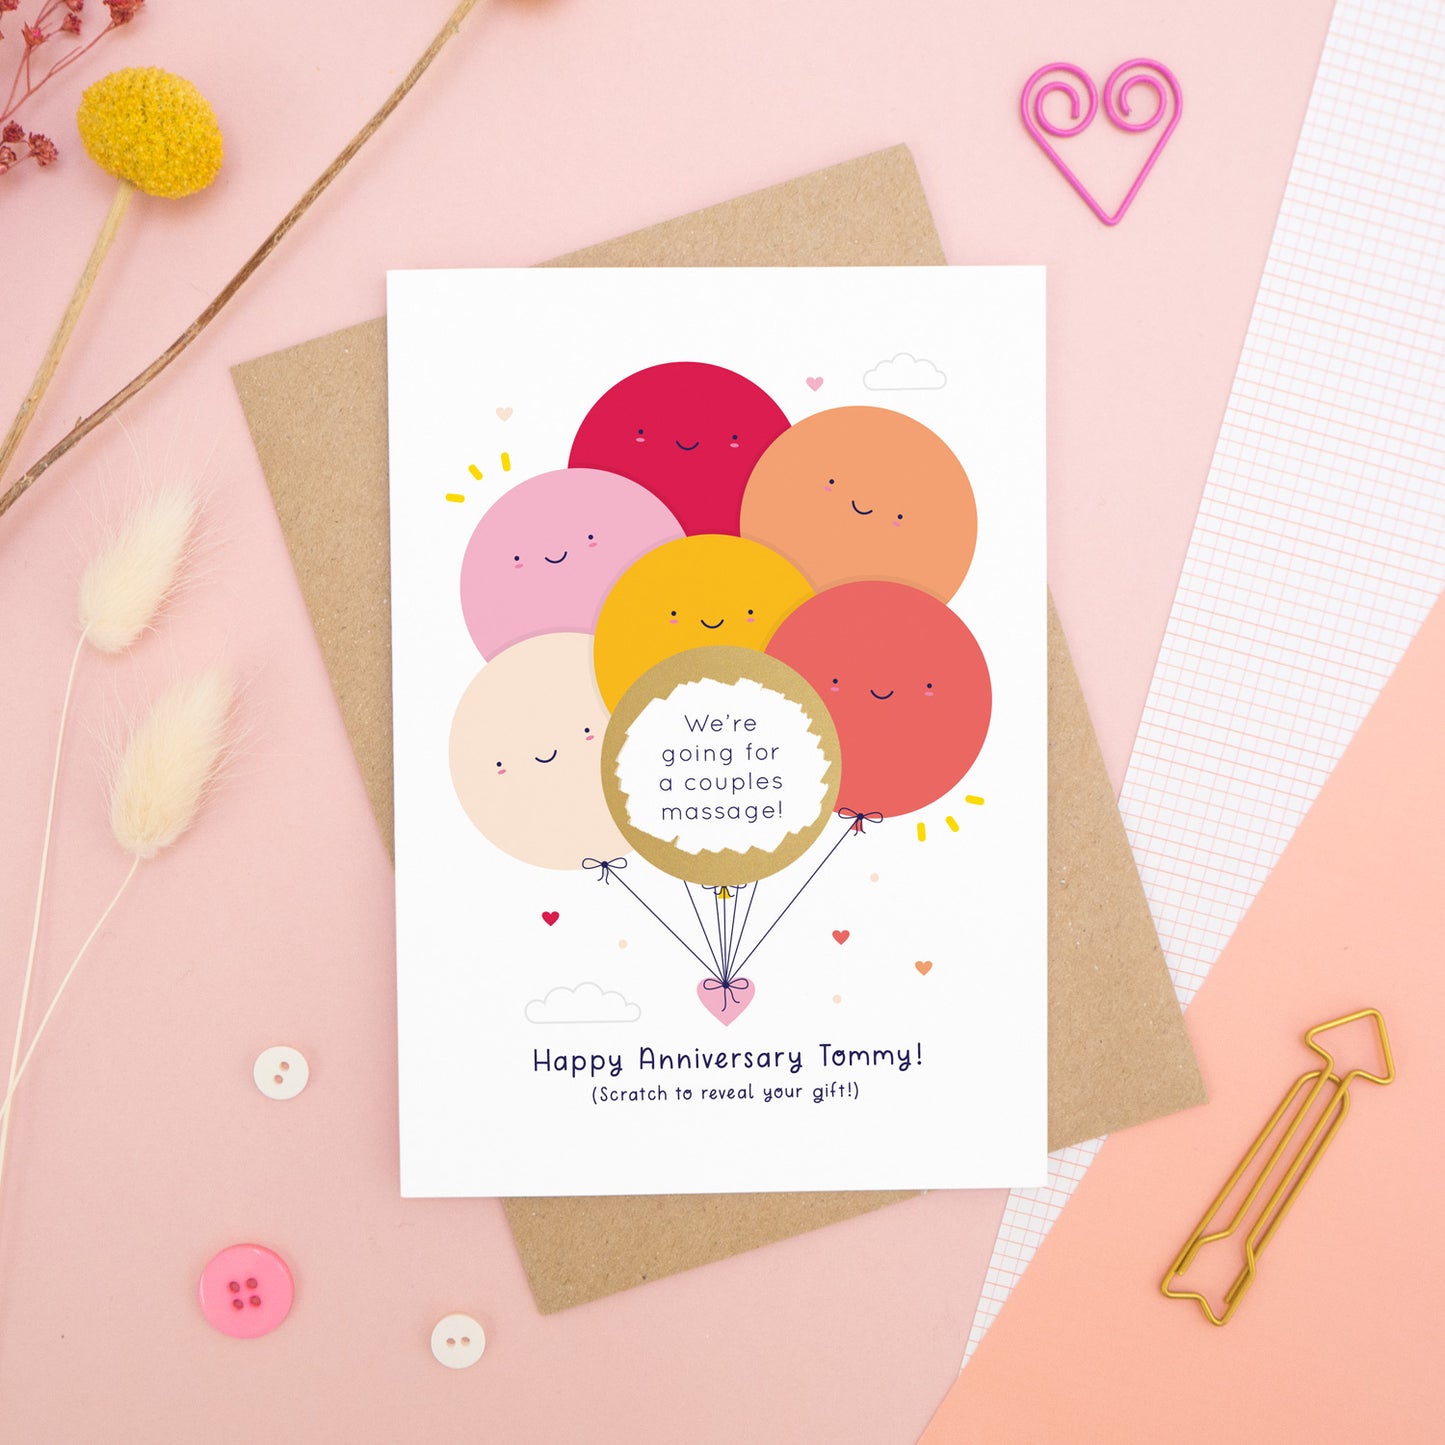 A personalised anniversary scratch card photographed on a pink background with floral props, paper clips, and buttons. This card shows the red & peach colour scheme and the golden circle has been scratched off to reveal the secret message!